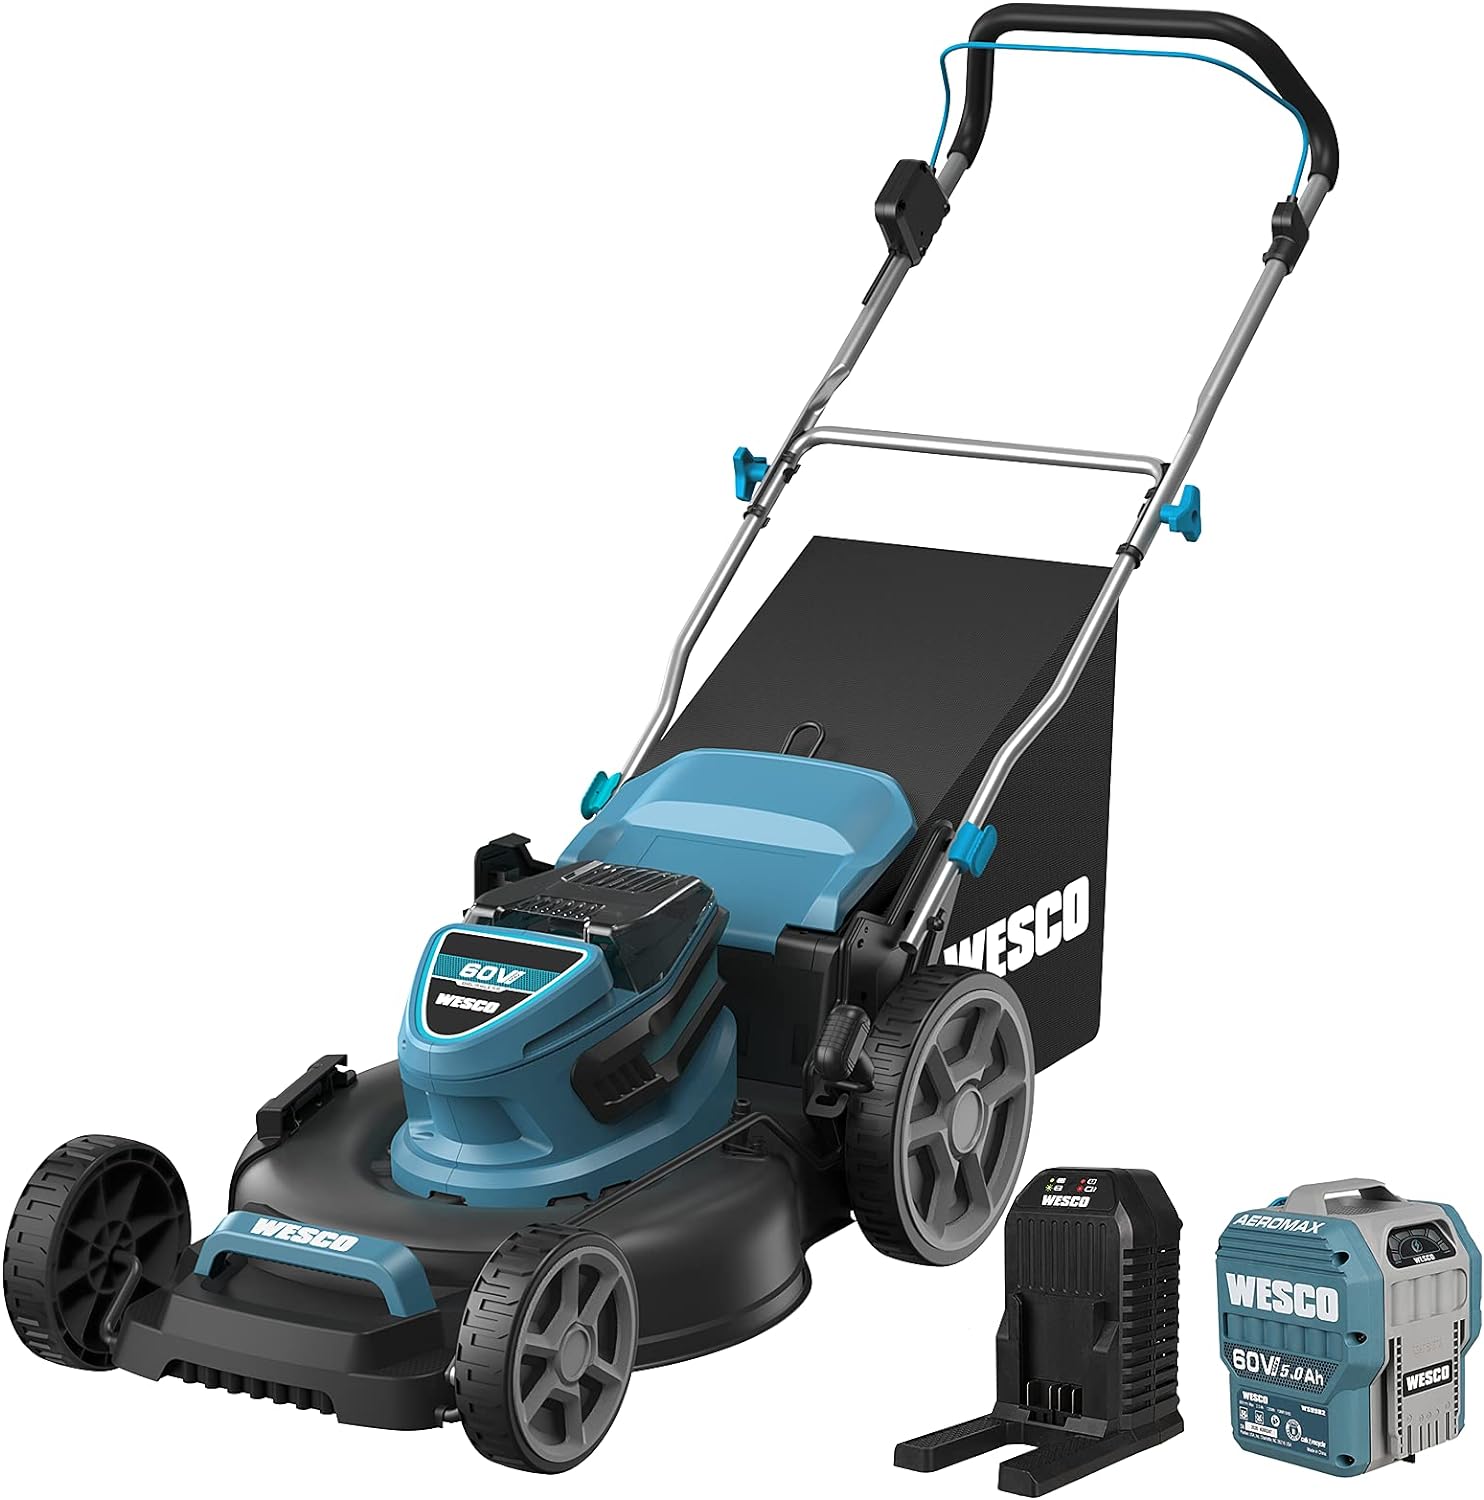 Cordless Lawn Mower, WESCO 60V Brushless Push Lawn Mower, 20-Inch3-in-1, 5.0Ah Battery and Charger Included, 7 Mowing Heights, 13.7 Gallon Grass Bag/WS8704U